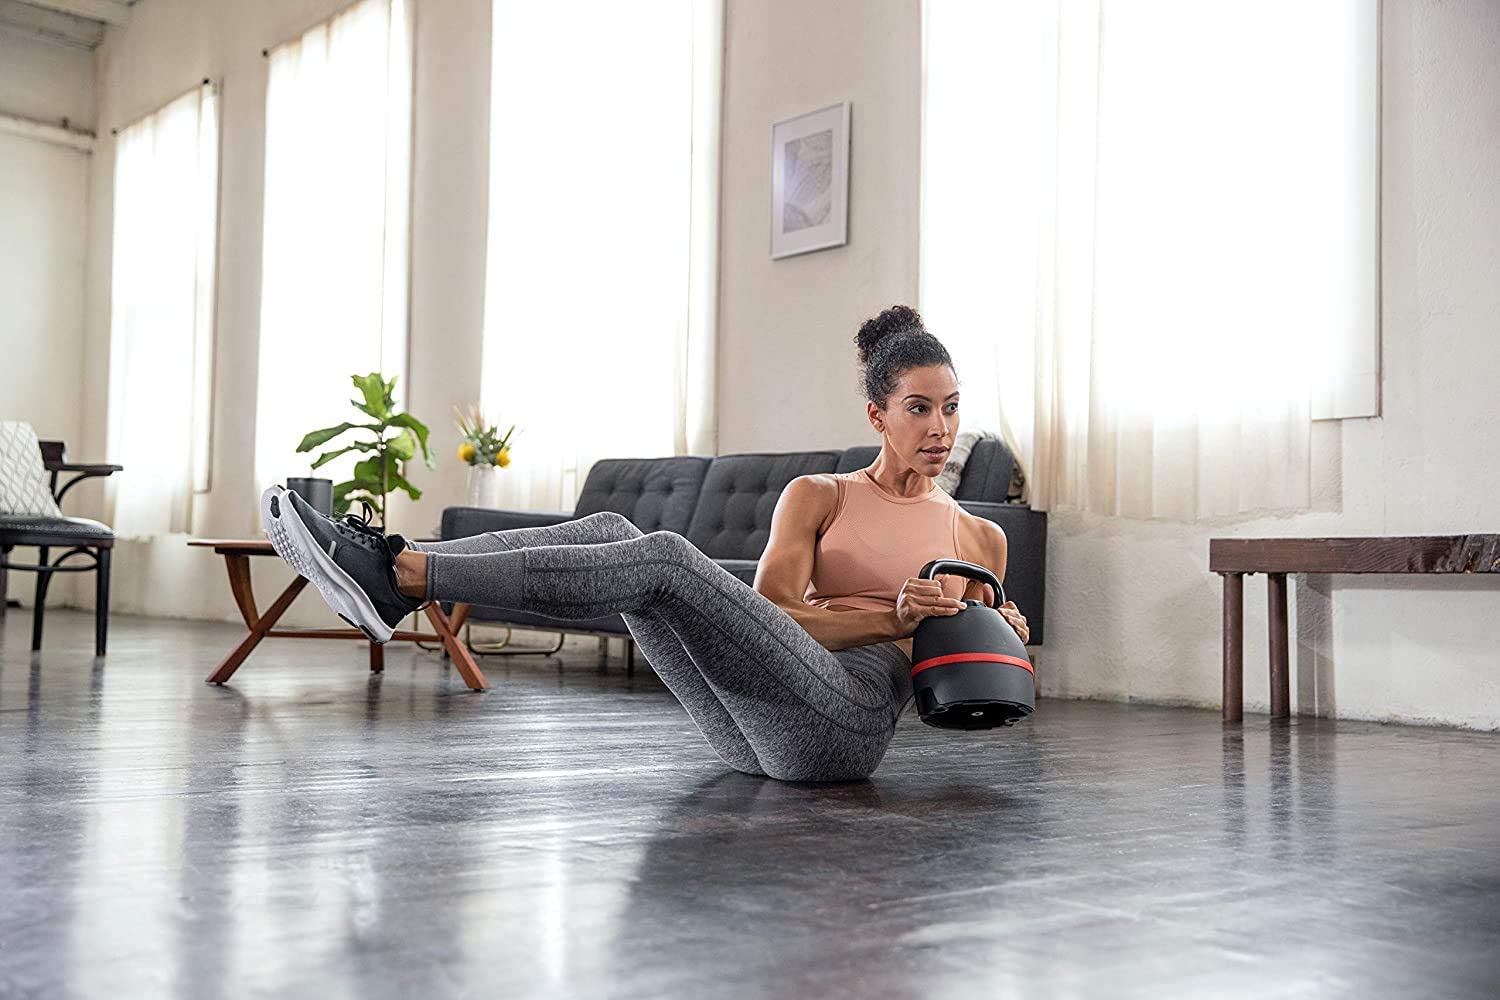 Woman using the Bowflex SelectTech Kettlebell in a twist weight pilated exercise while seated on the floor of her living room.